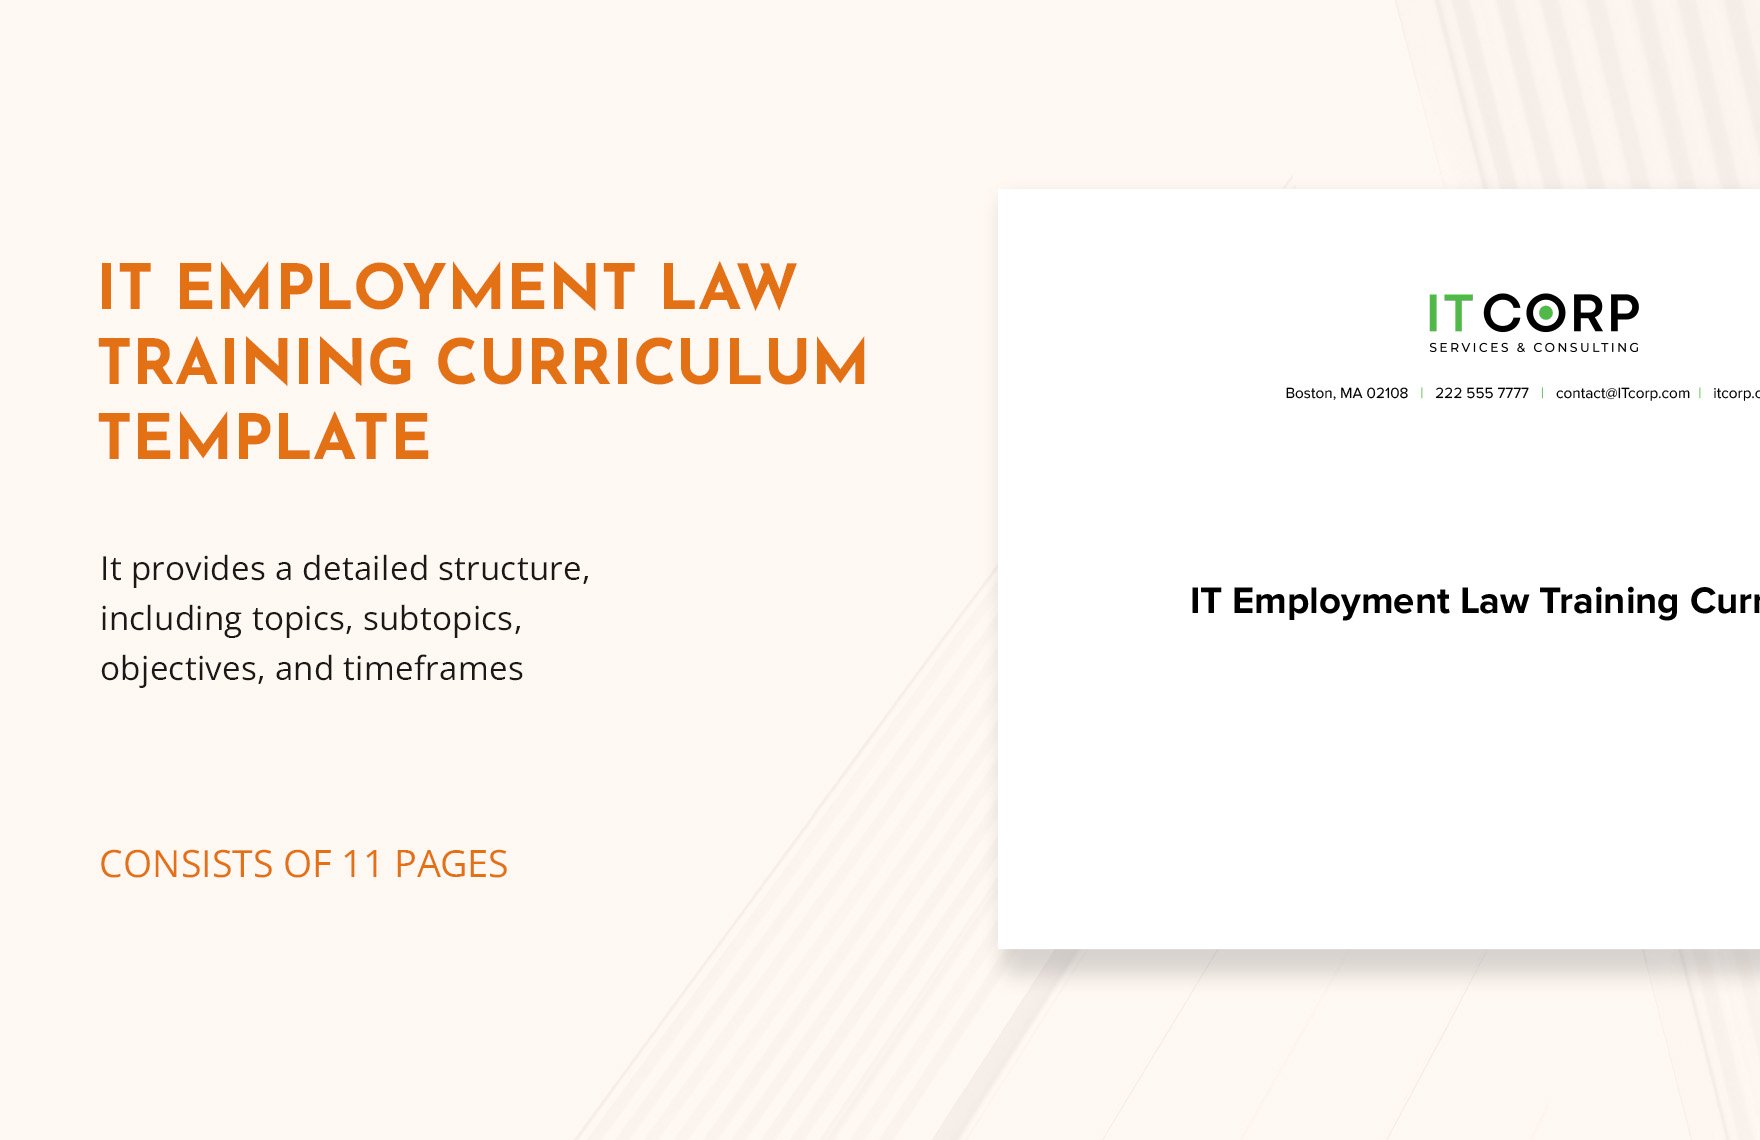 IT Employment Law Training Curriculum Template